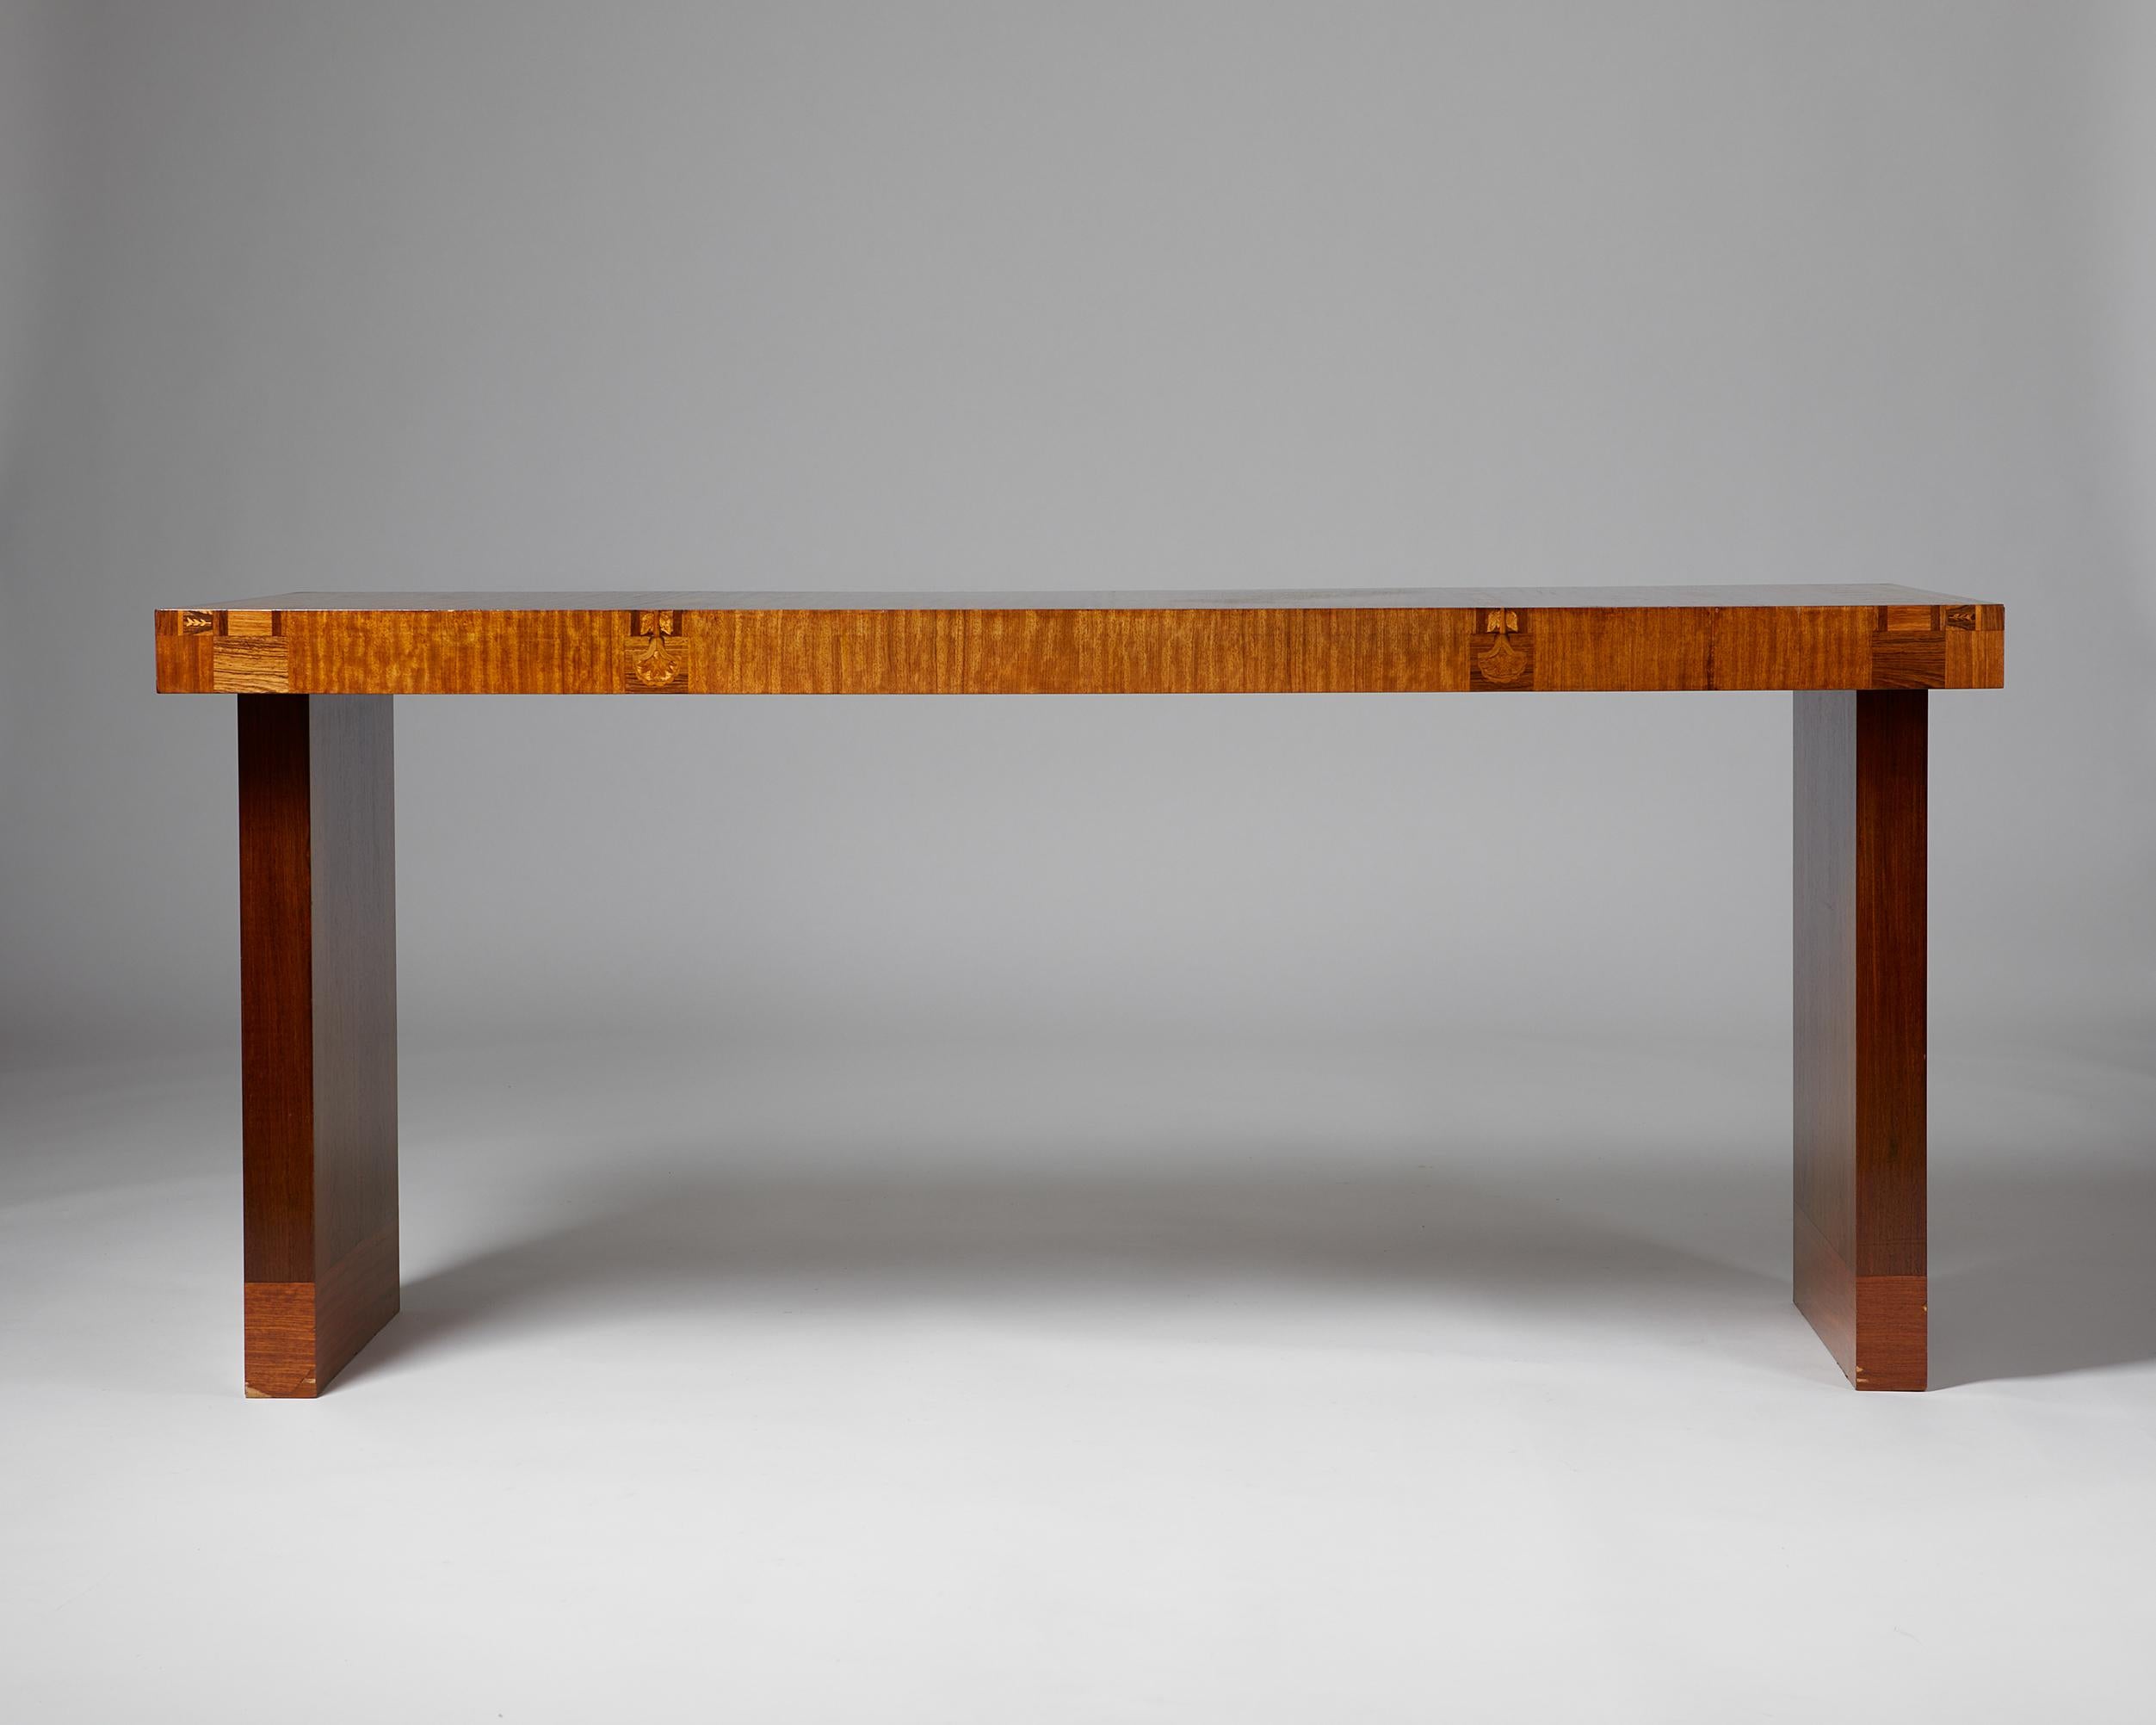 Wood Desk made of Mahogany and Walnut Designed by Carl Malmsten, Sweden, 1934